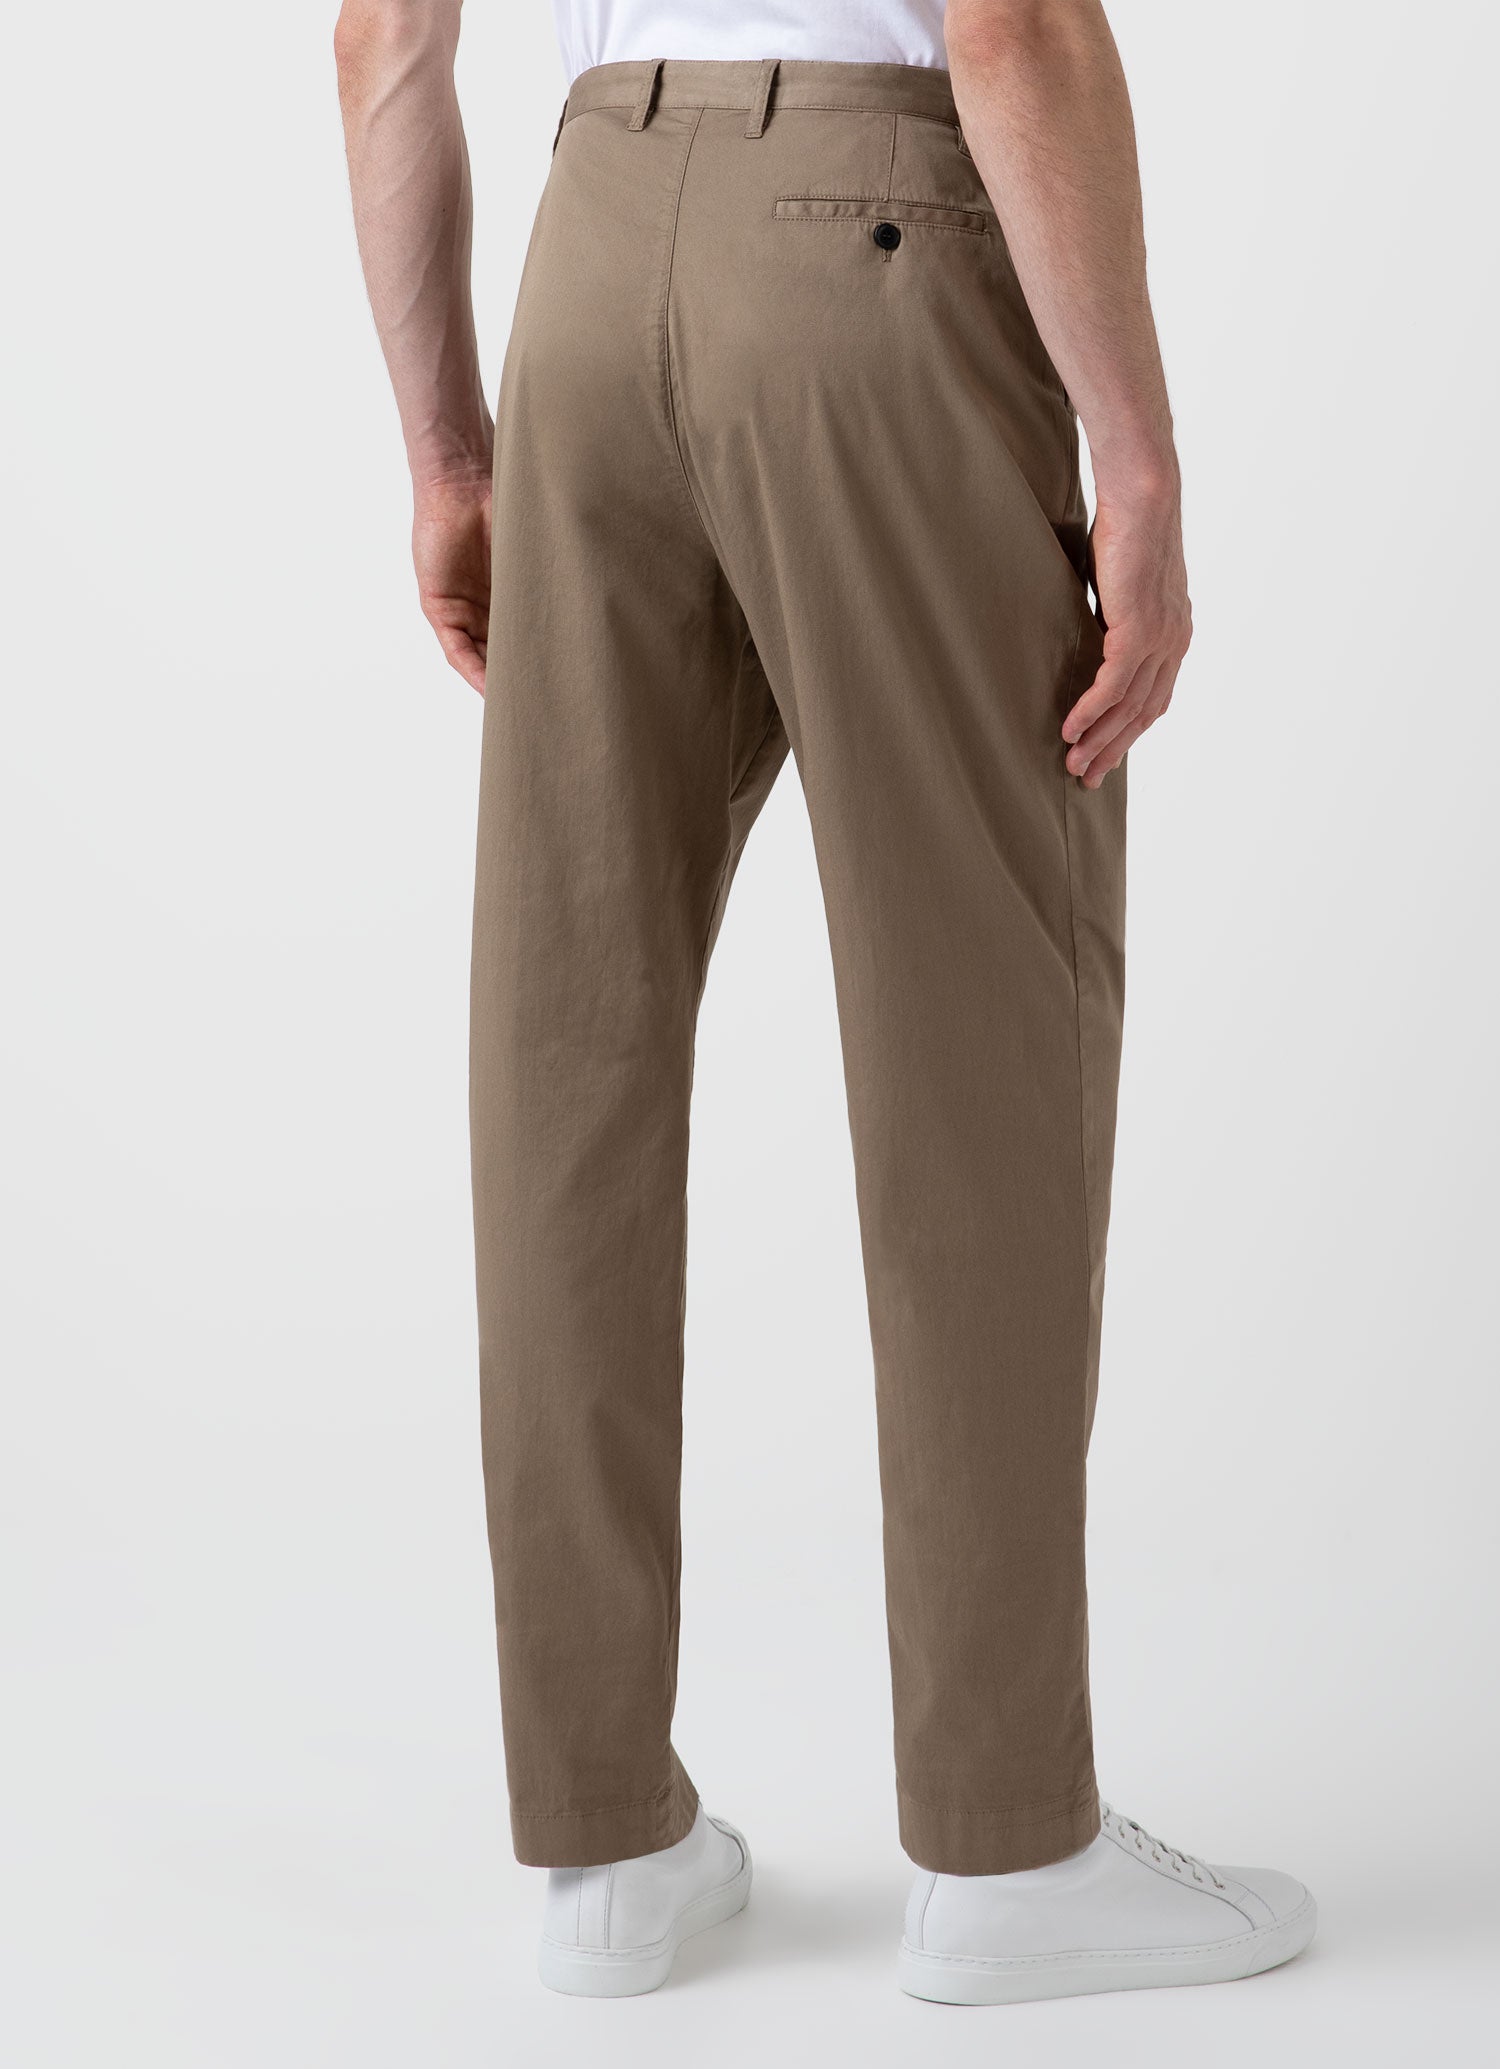 Men's Trousers | Chinos, Joggers & Jeans | Crew Clothing